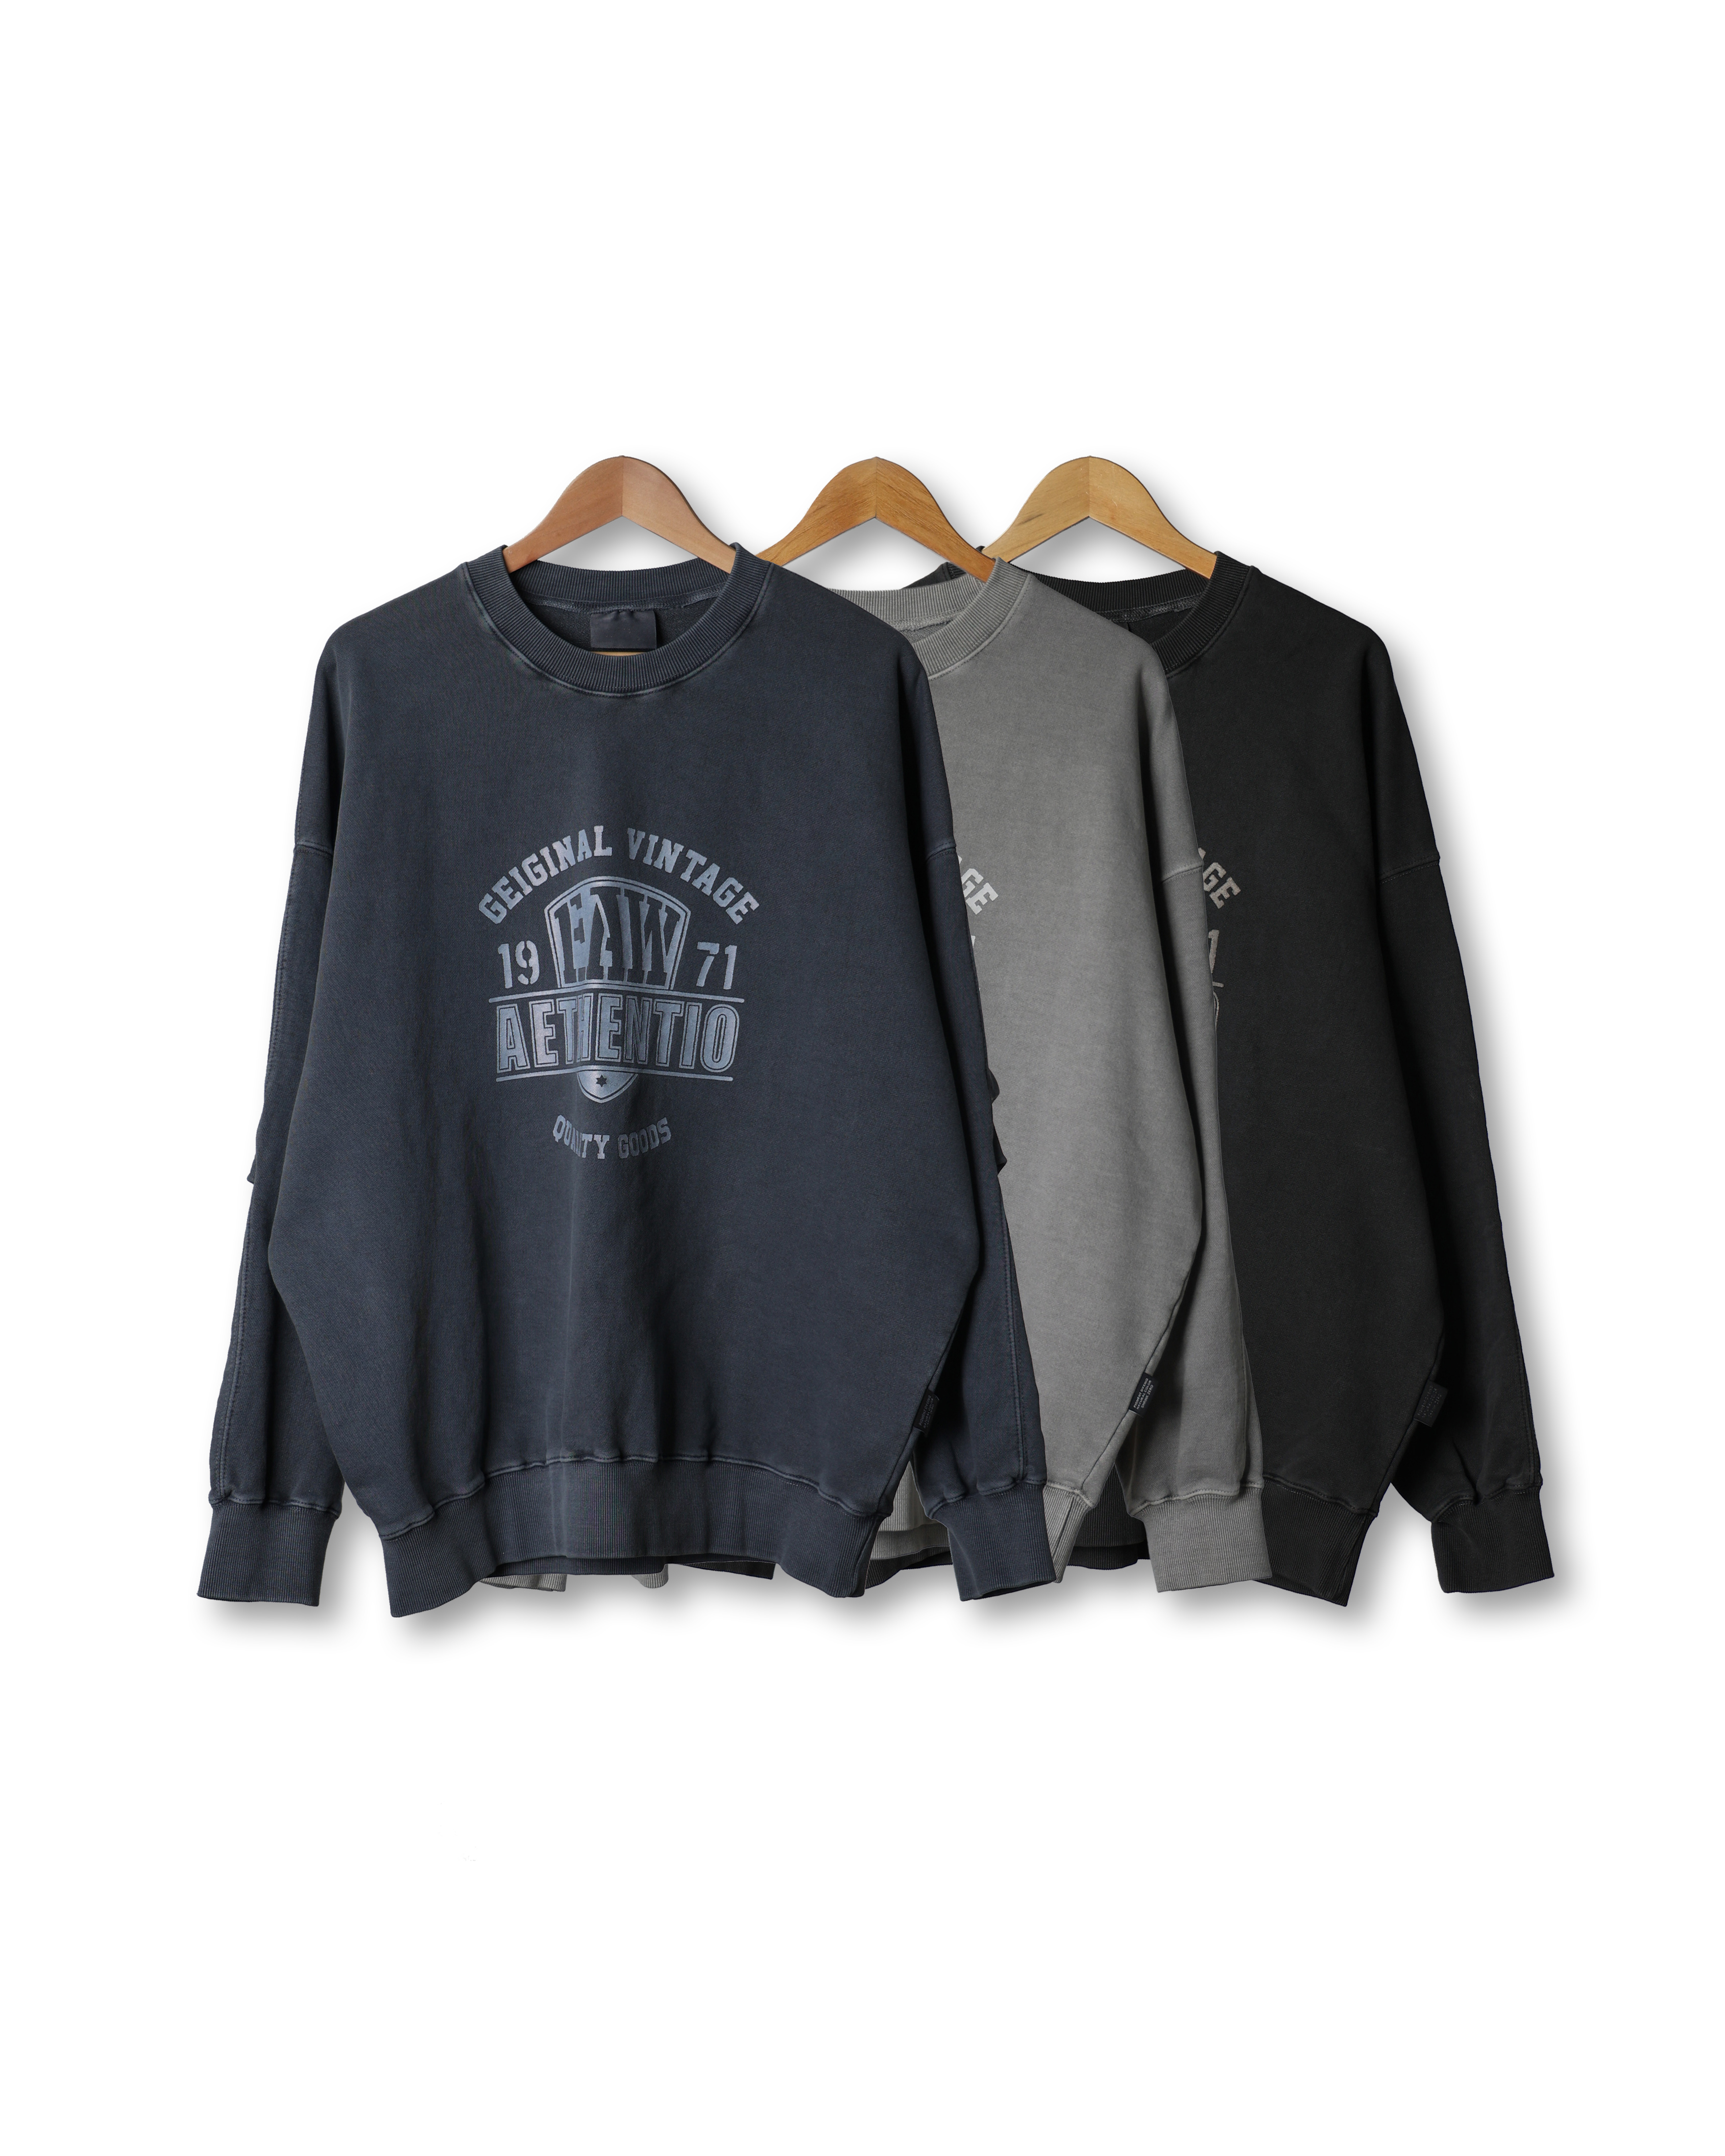 CLEAR Vintage Pigment Pleats Sweat Shirts (Charcoal/Gray/Navy)